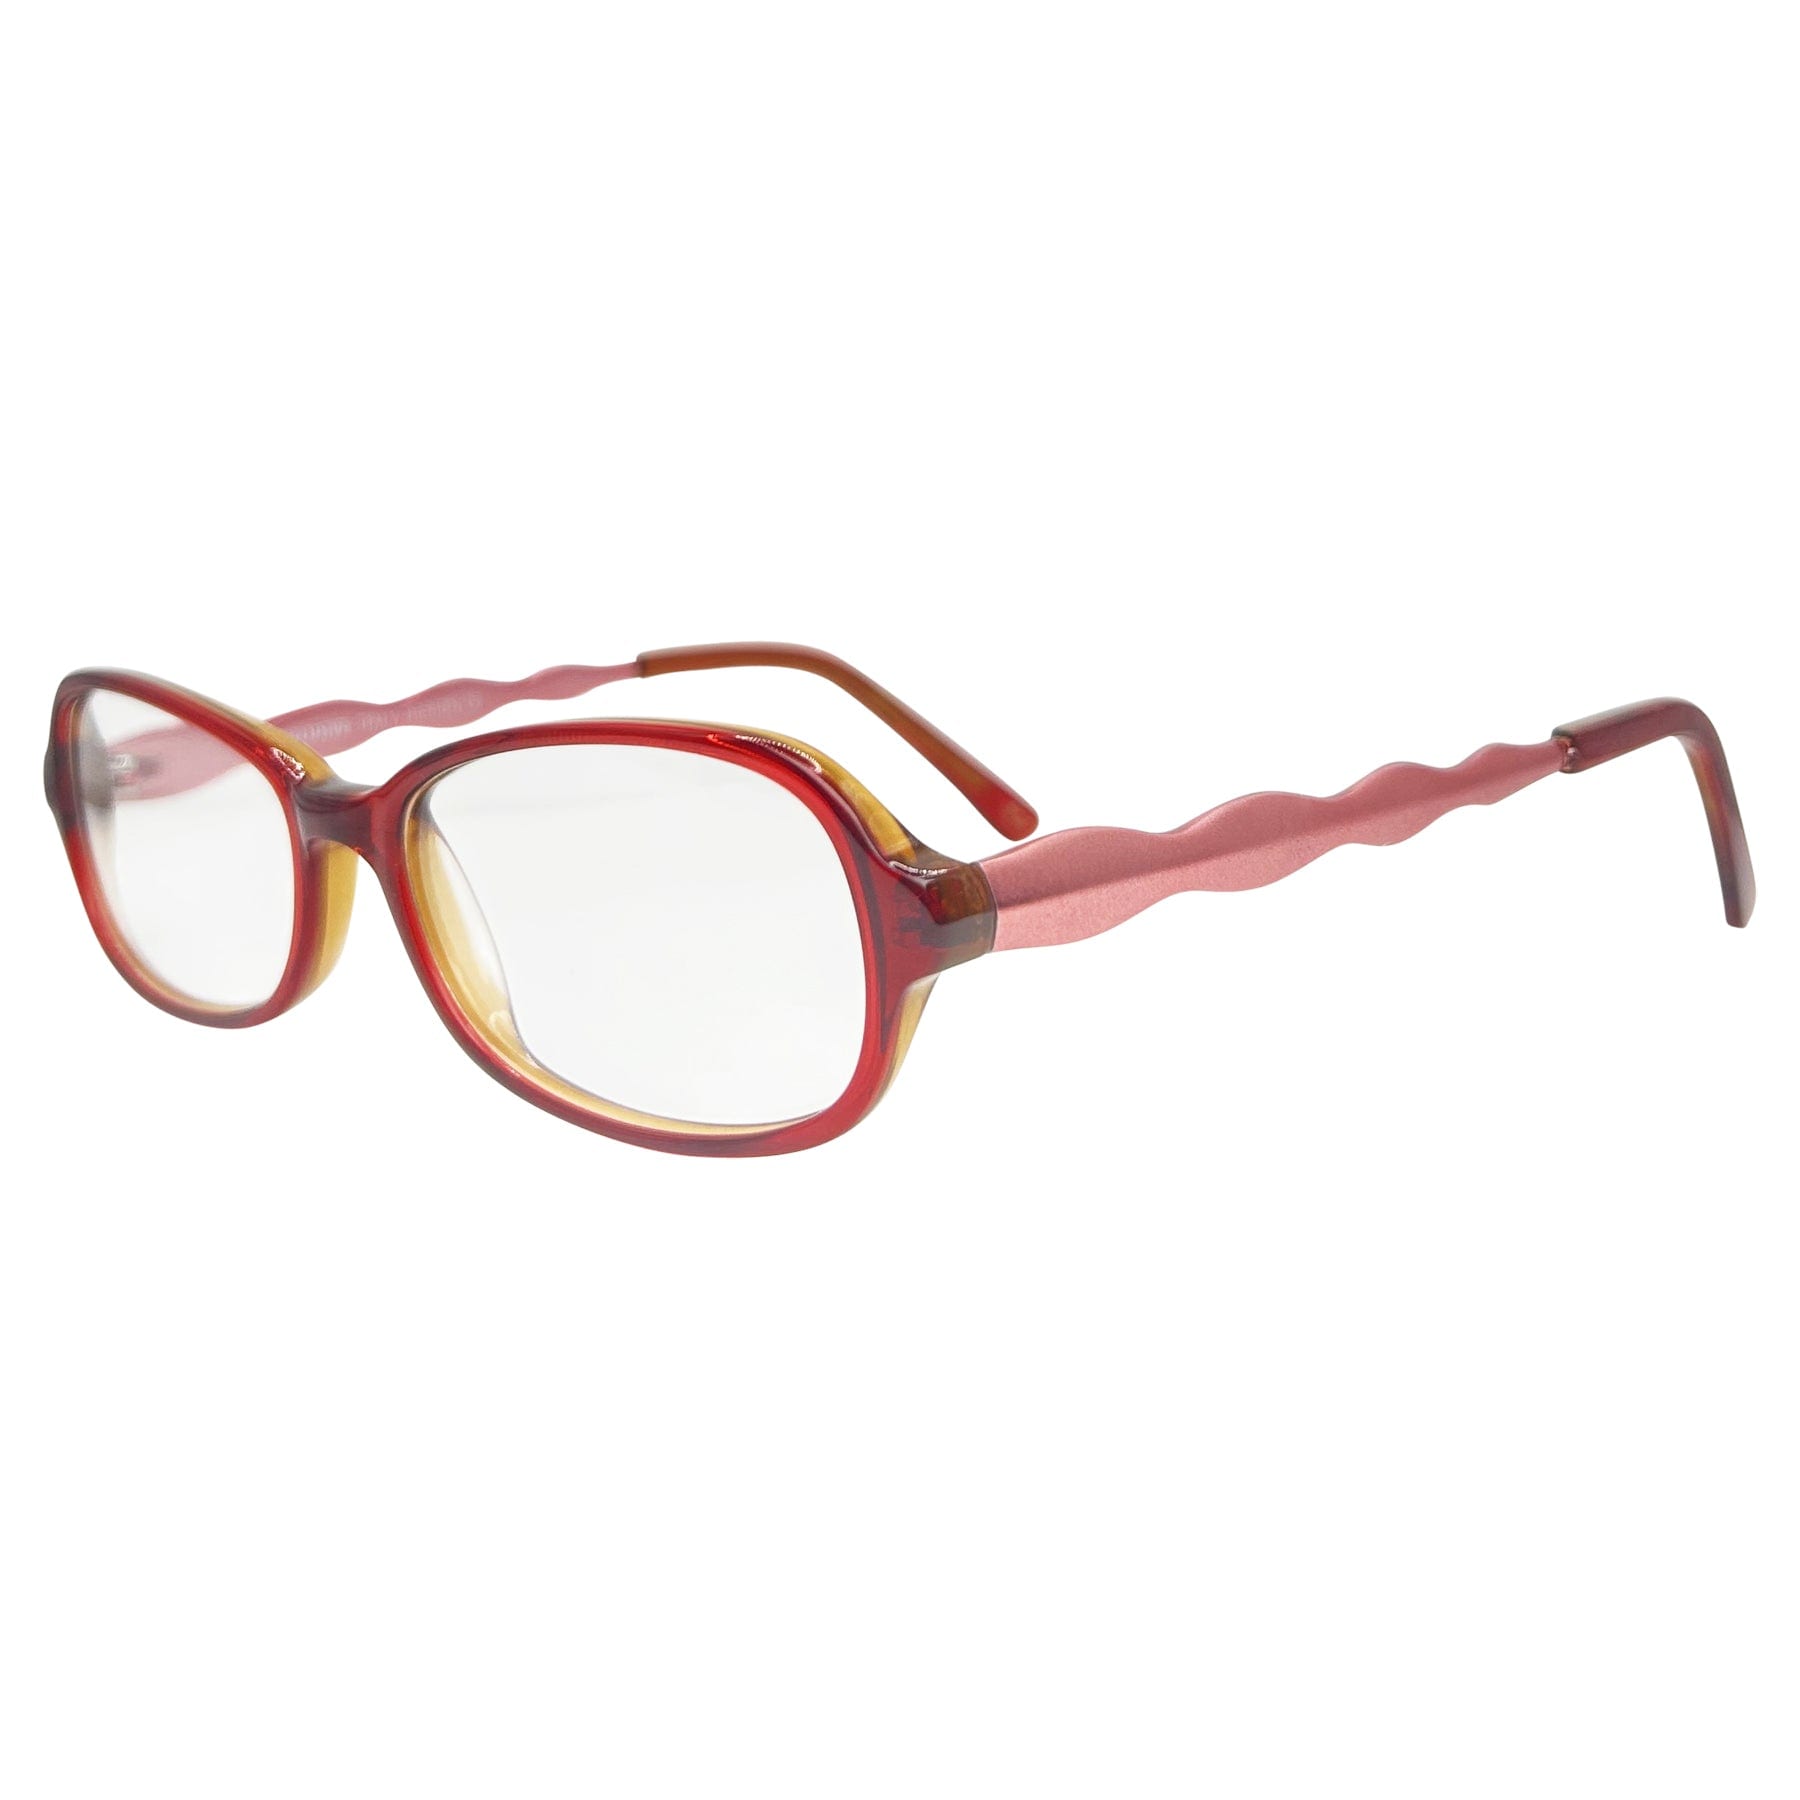 vintage glasses with a cherry frame nd pink metal arms with a clear lens 